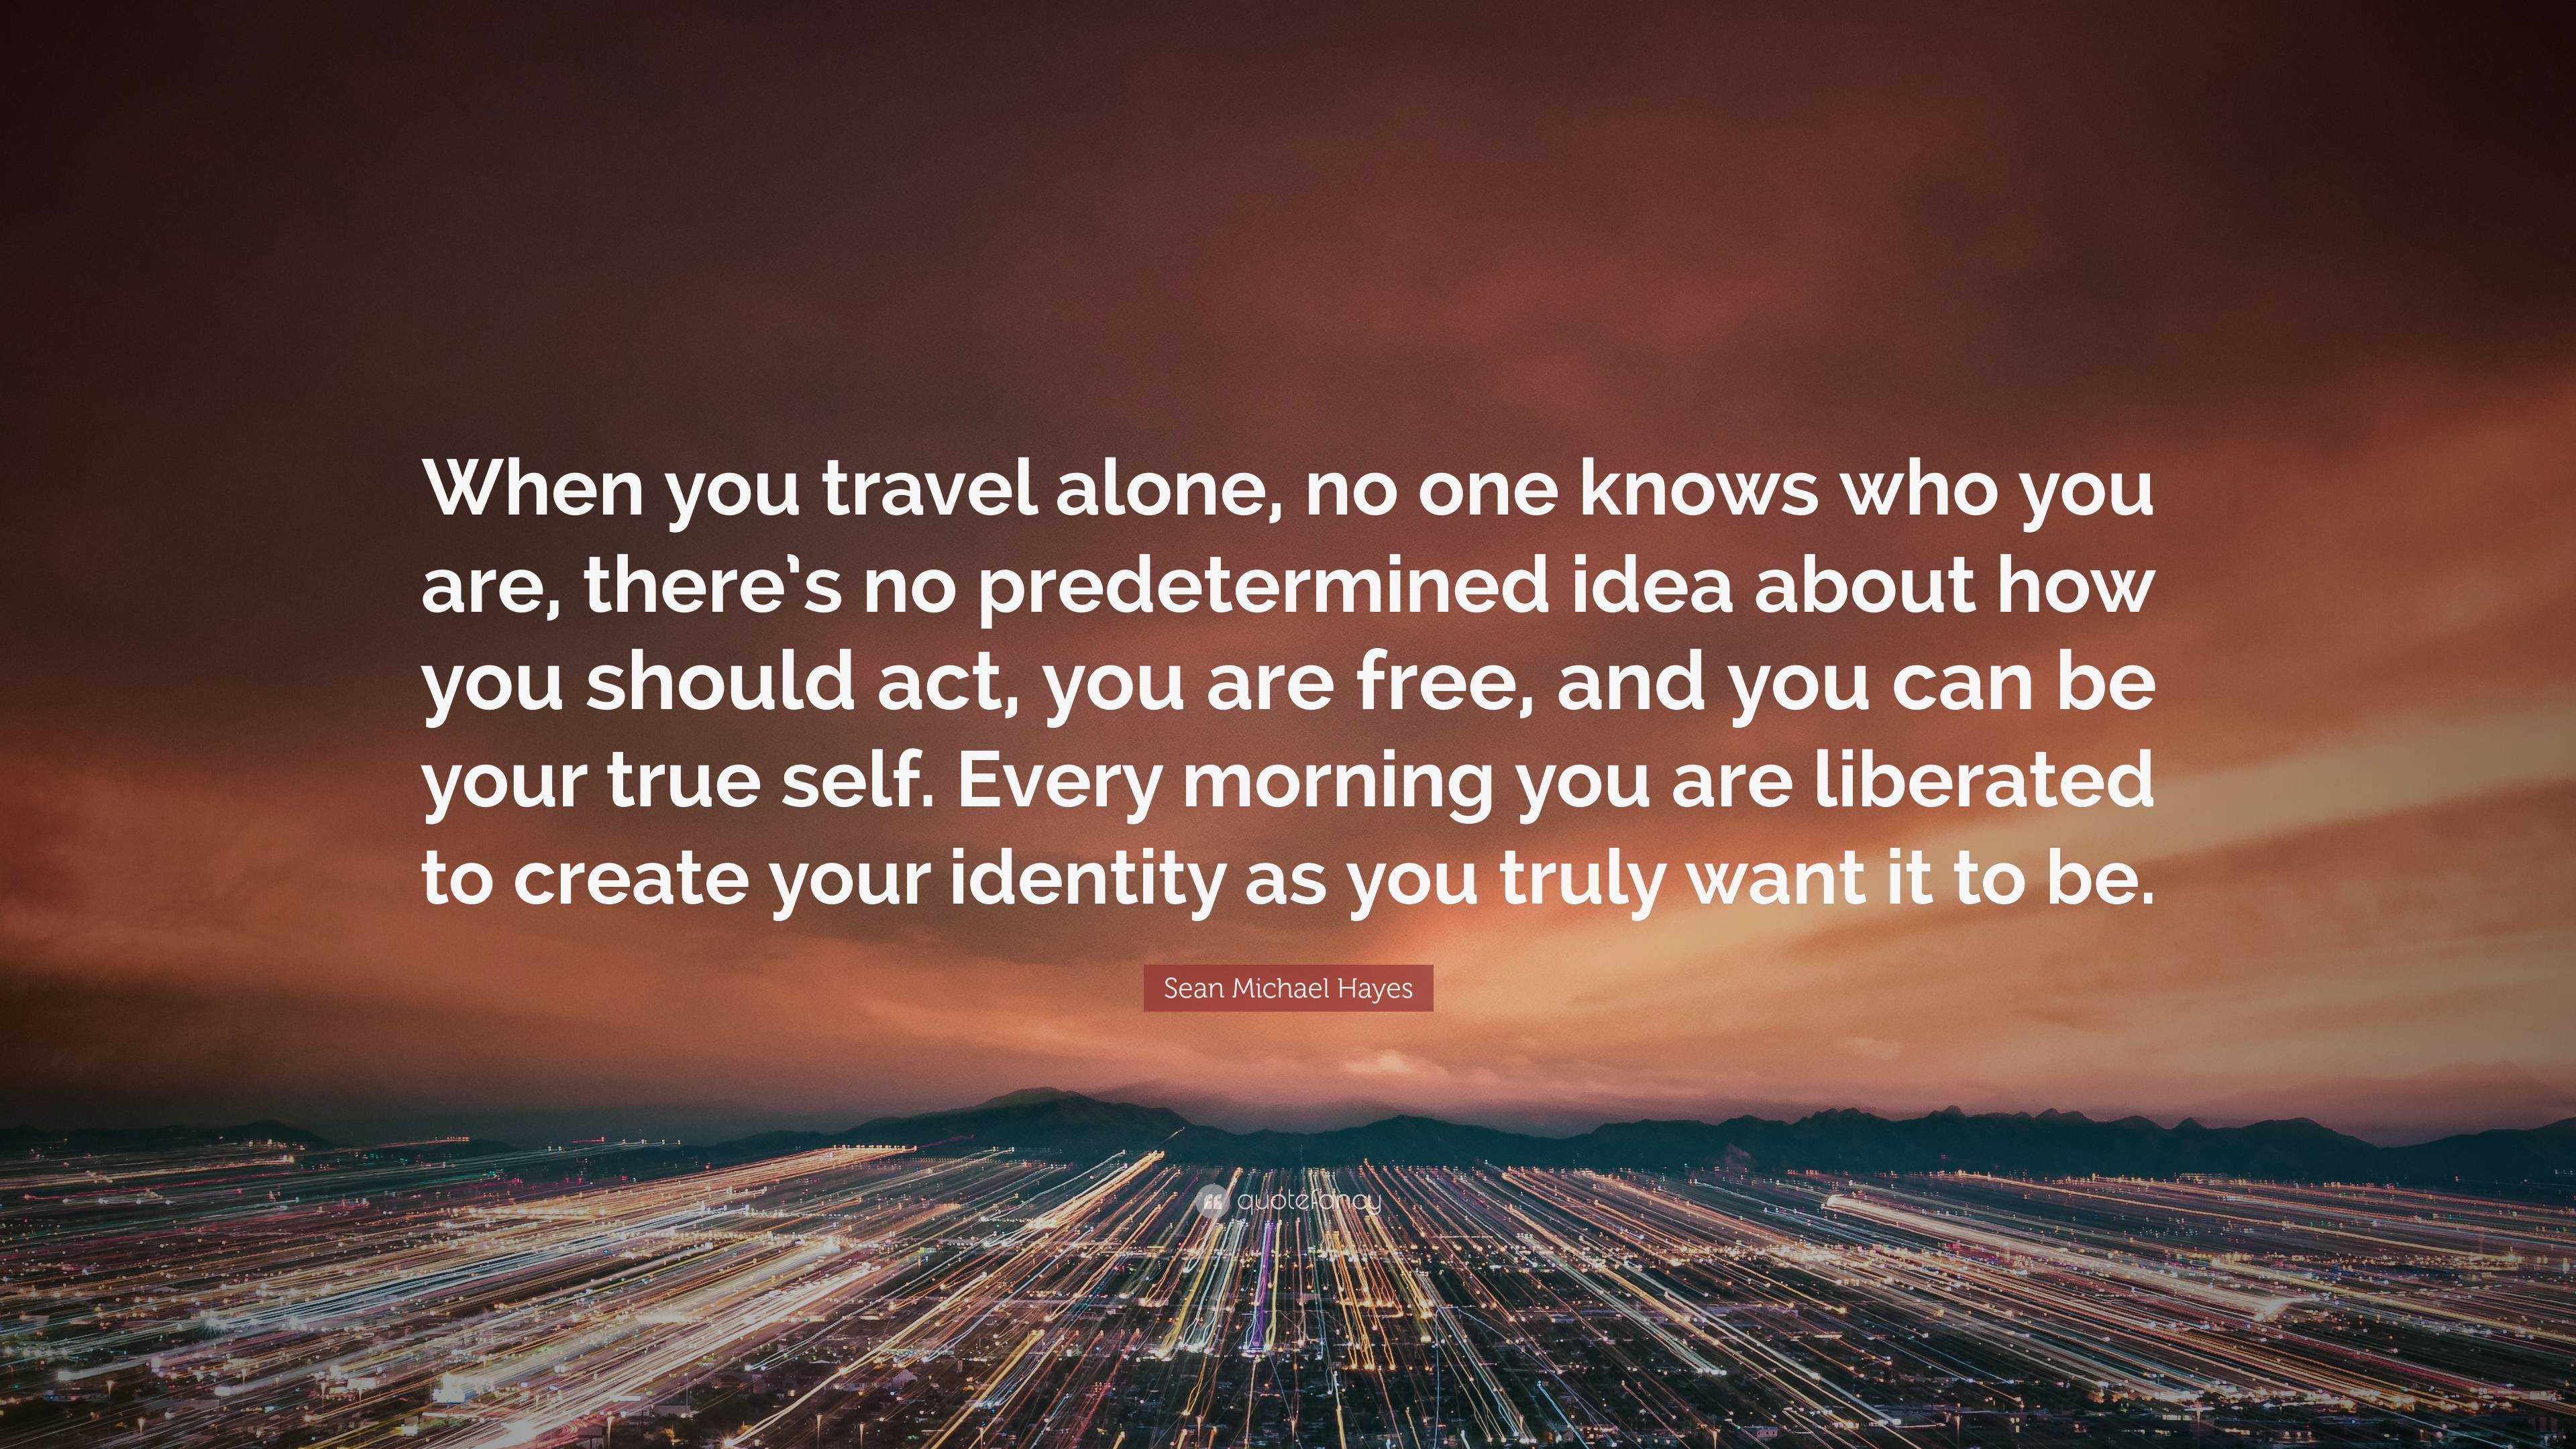 Sean Michael Hayes Quote: “When you travel alone, no one knows who